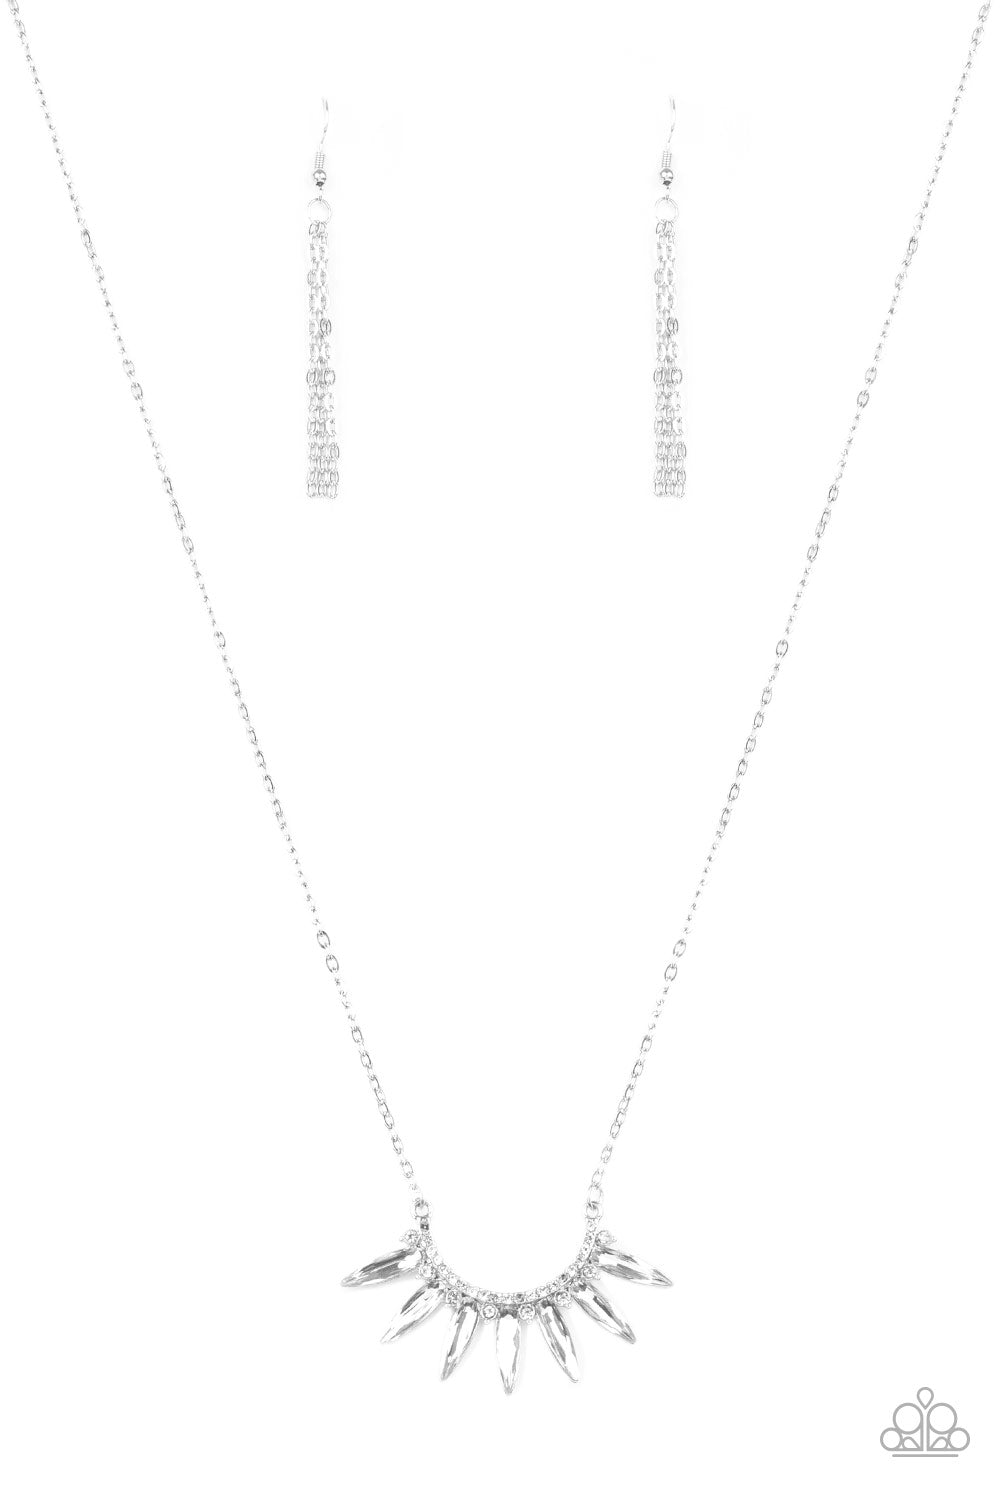 Empirical Elegance - White and Silver Bling Necklace - Paparazzi Accessories - Glassy white gems flare out from the bottom of a bowing silver frame encrusted in glittery white rhinestones. The ornate pendant swings from the bottom of a mid-length silver chain for an edgy-glamorous look. Features an adjustable clasp closure. Sold as one individual necklace. Includes one pair of matching earrings.